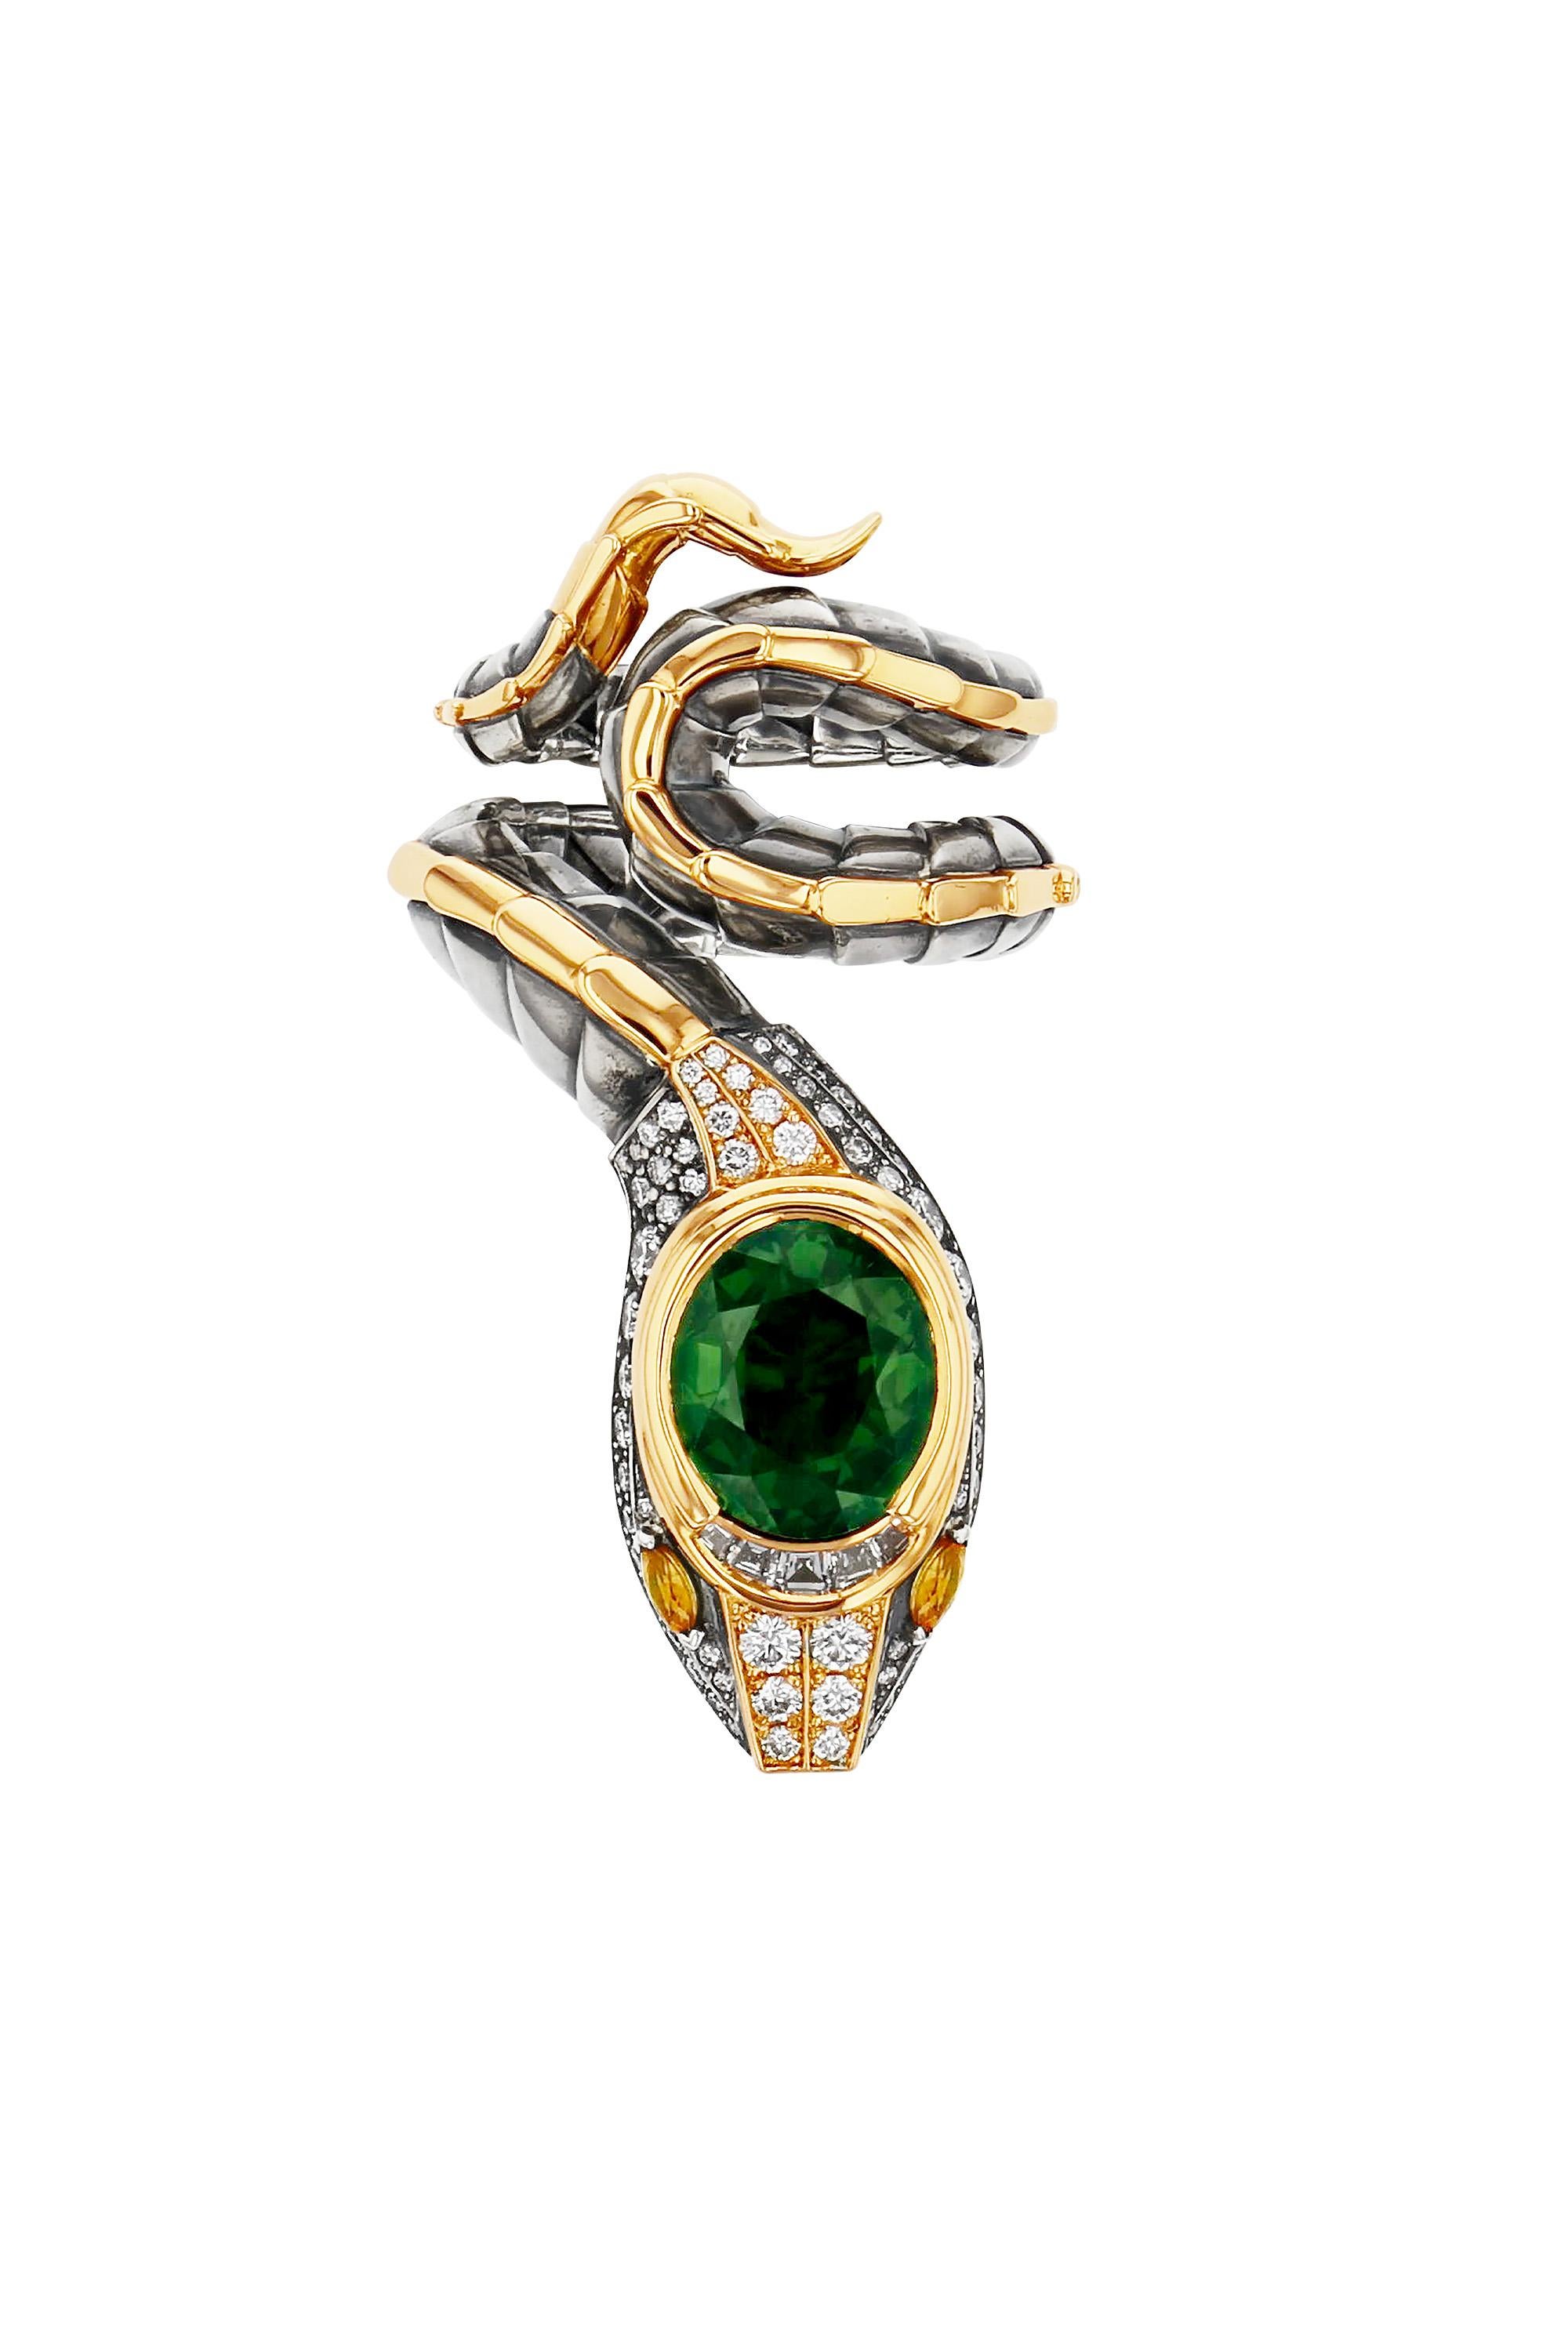 Yellow gold and distressed silver ring. The body, wrapped in distressed silver scales with a yellow gold dorsal ridge, ends with a head that is paved with diamonds and animated with yellow sapphire eyes. At its summit, it is set with a green